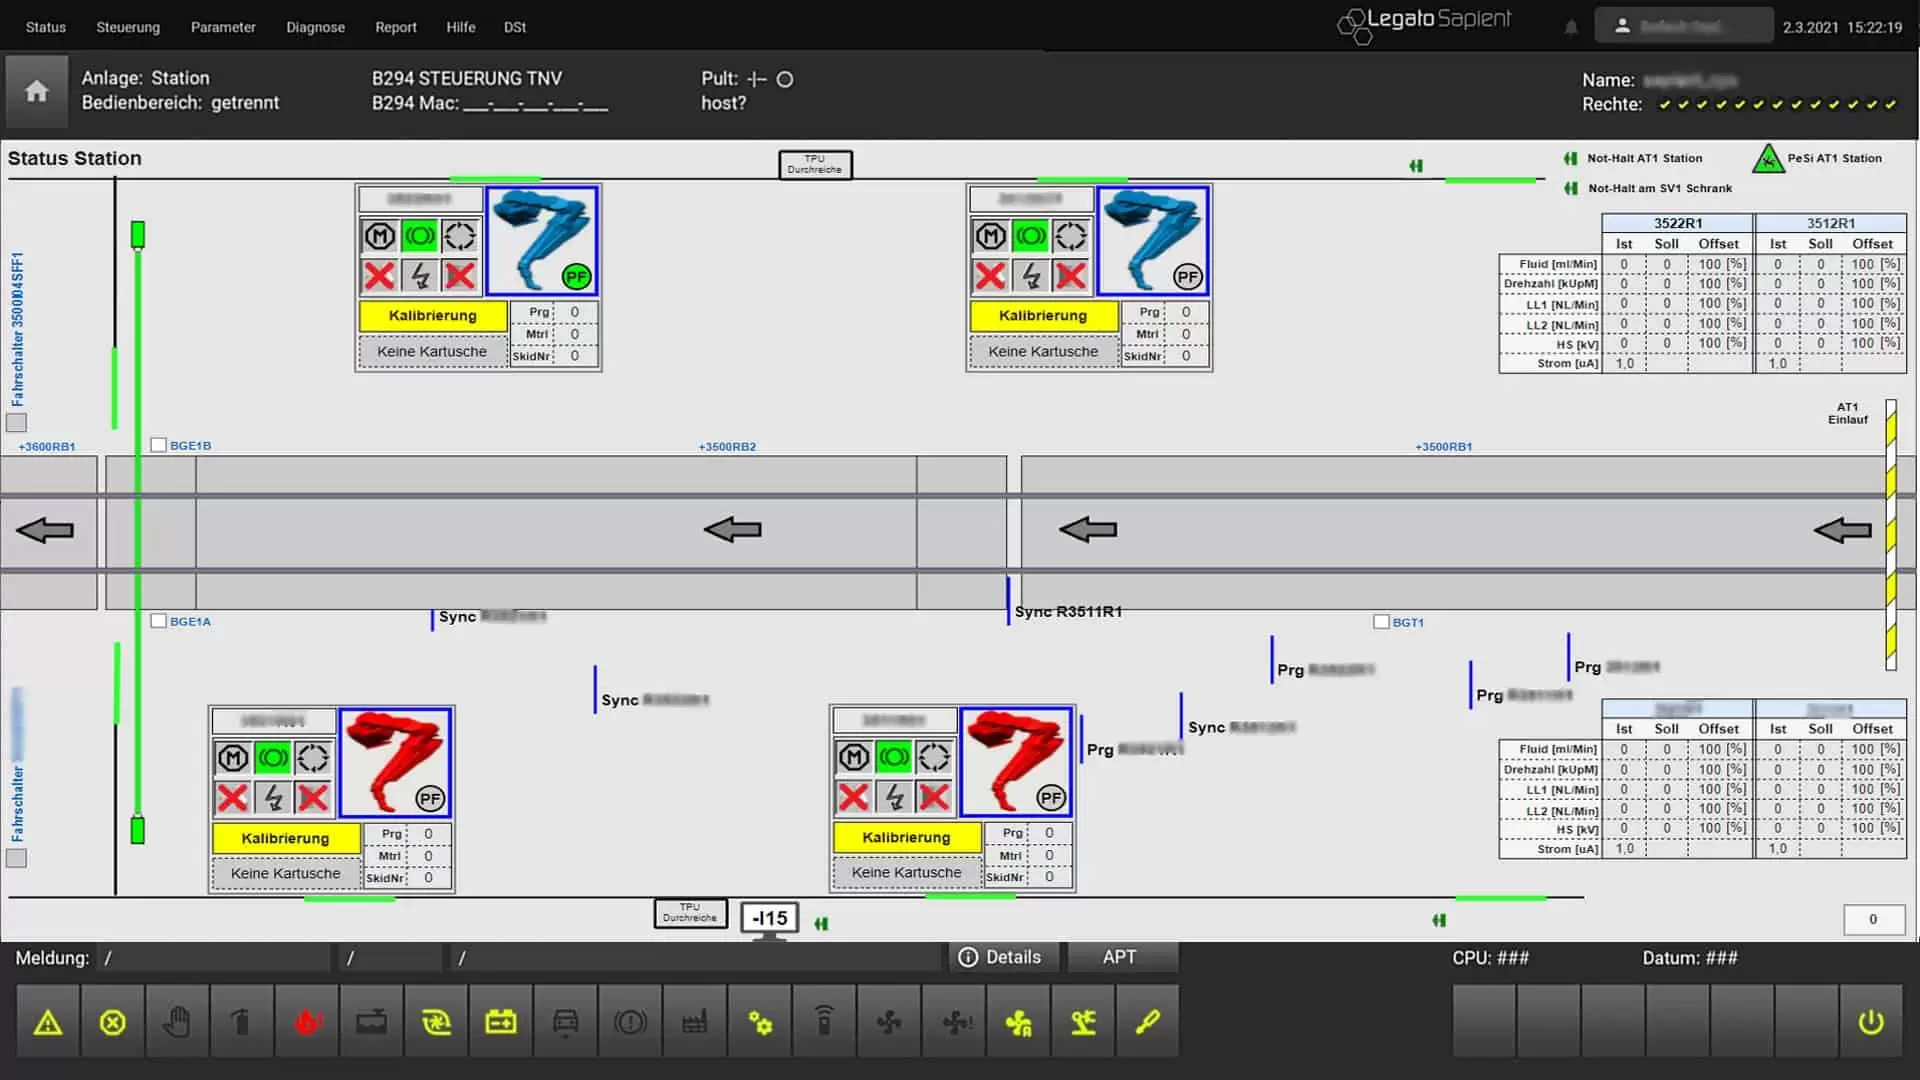 switch to manual in the control menu of the hmi scada system